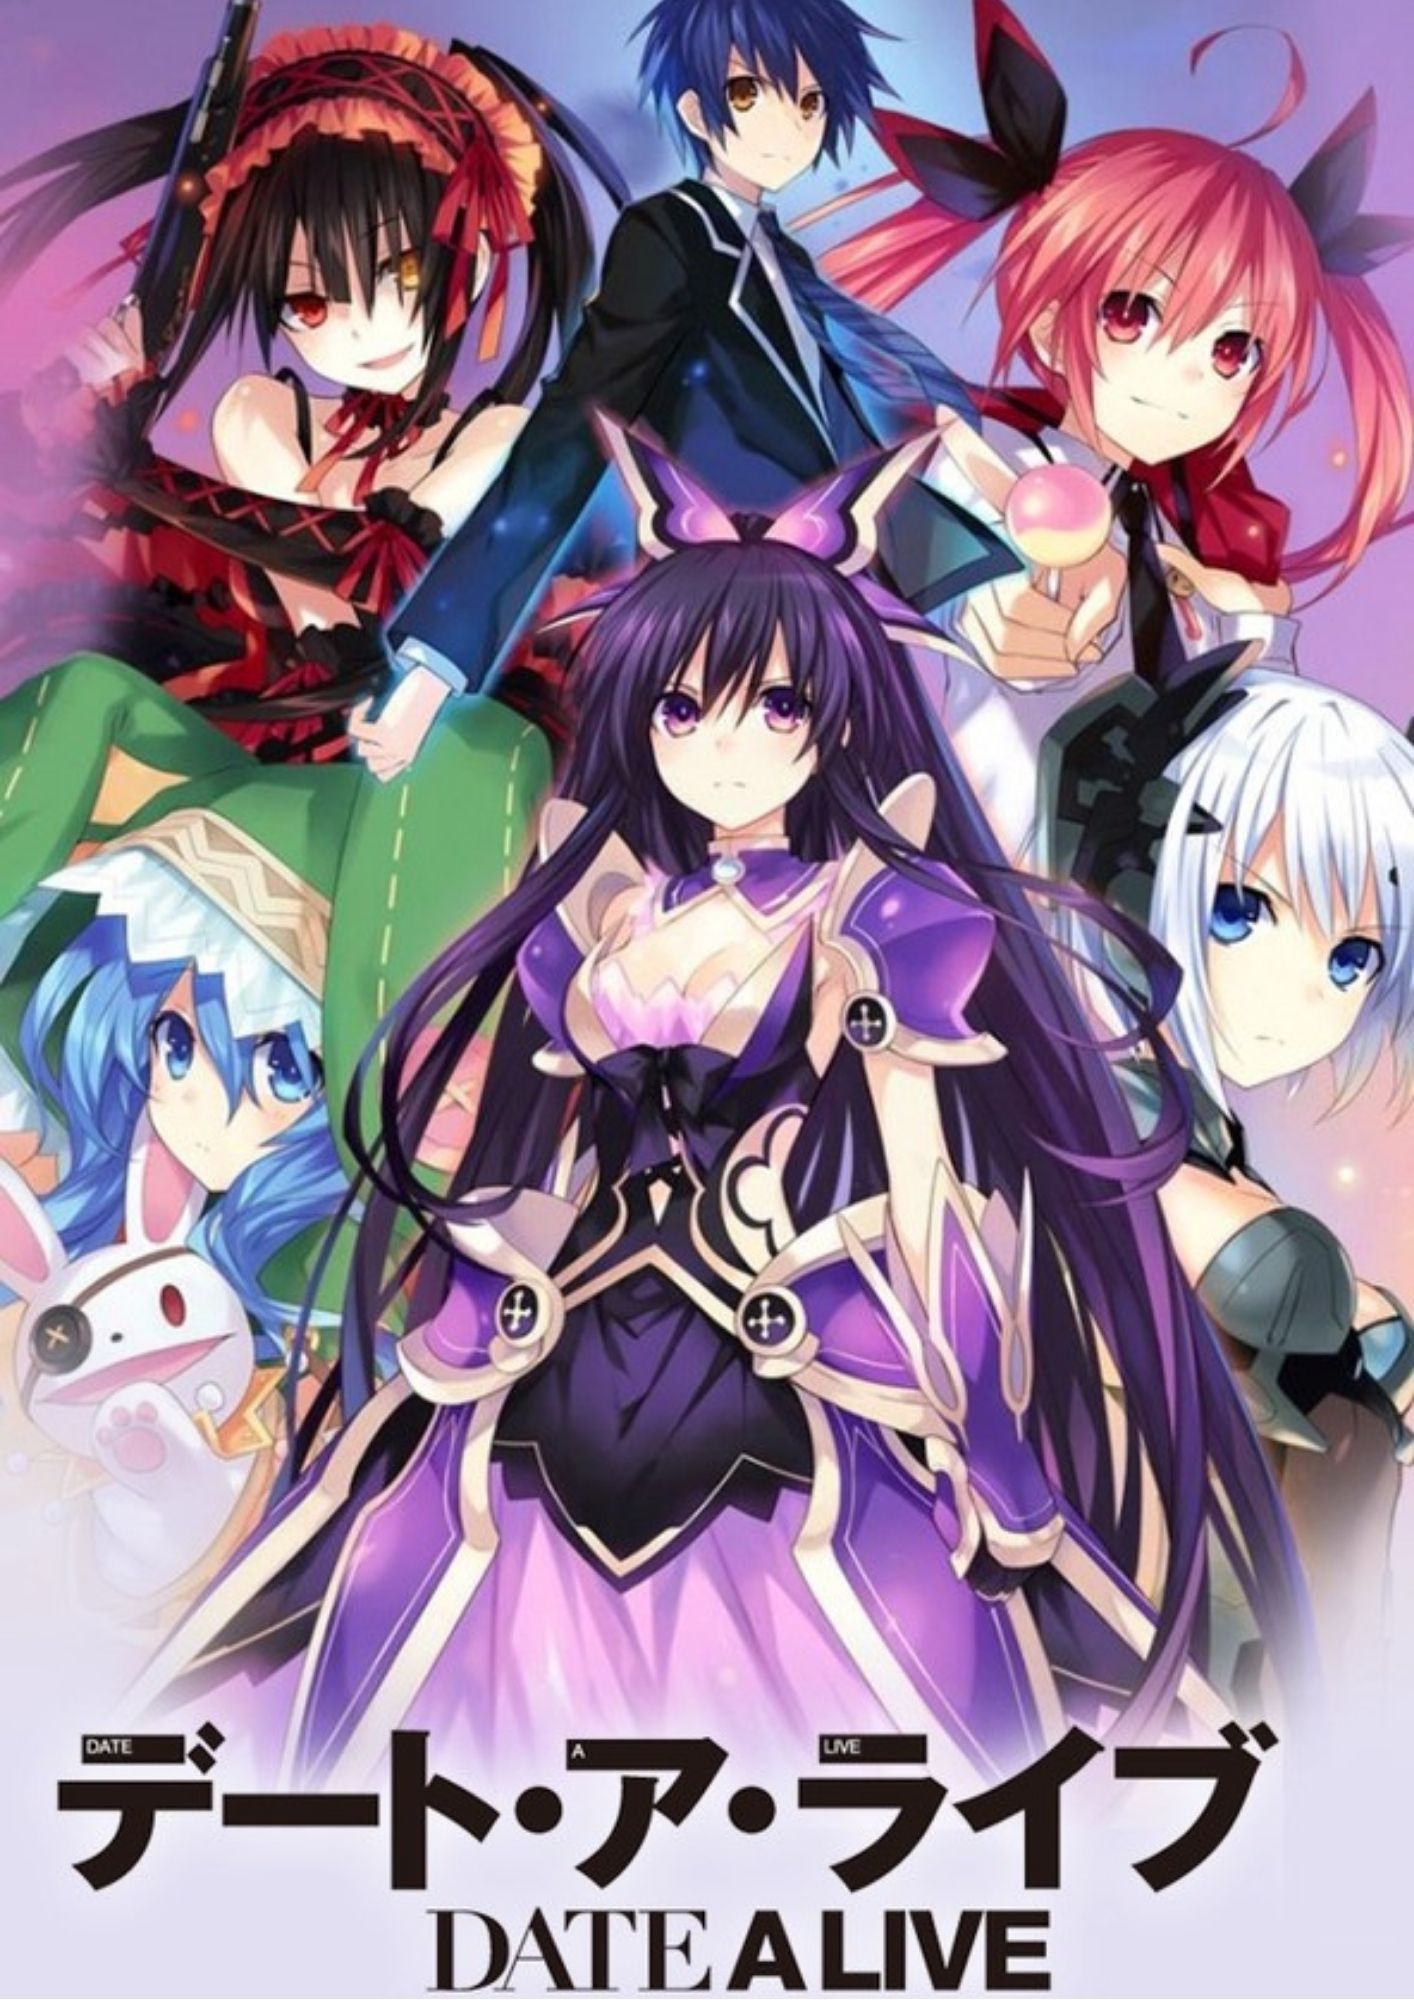 Date A Live - 𝗗𝗮𝘁𝗲 𝗔 𝗟𝗶𝘃𝗲: 𝗦𝗽𝗶𝗿𝗶𝘁 𝗣𝗹𝗲𝗱𝗴𝗲 –  𝗚𝗹𝗼𝗯𝗮𝗹 wiki has